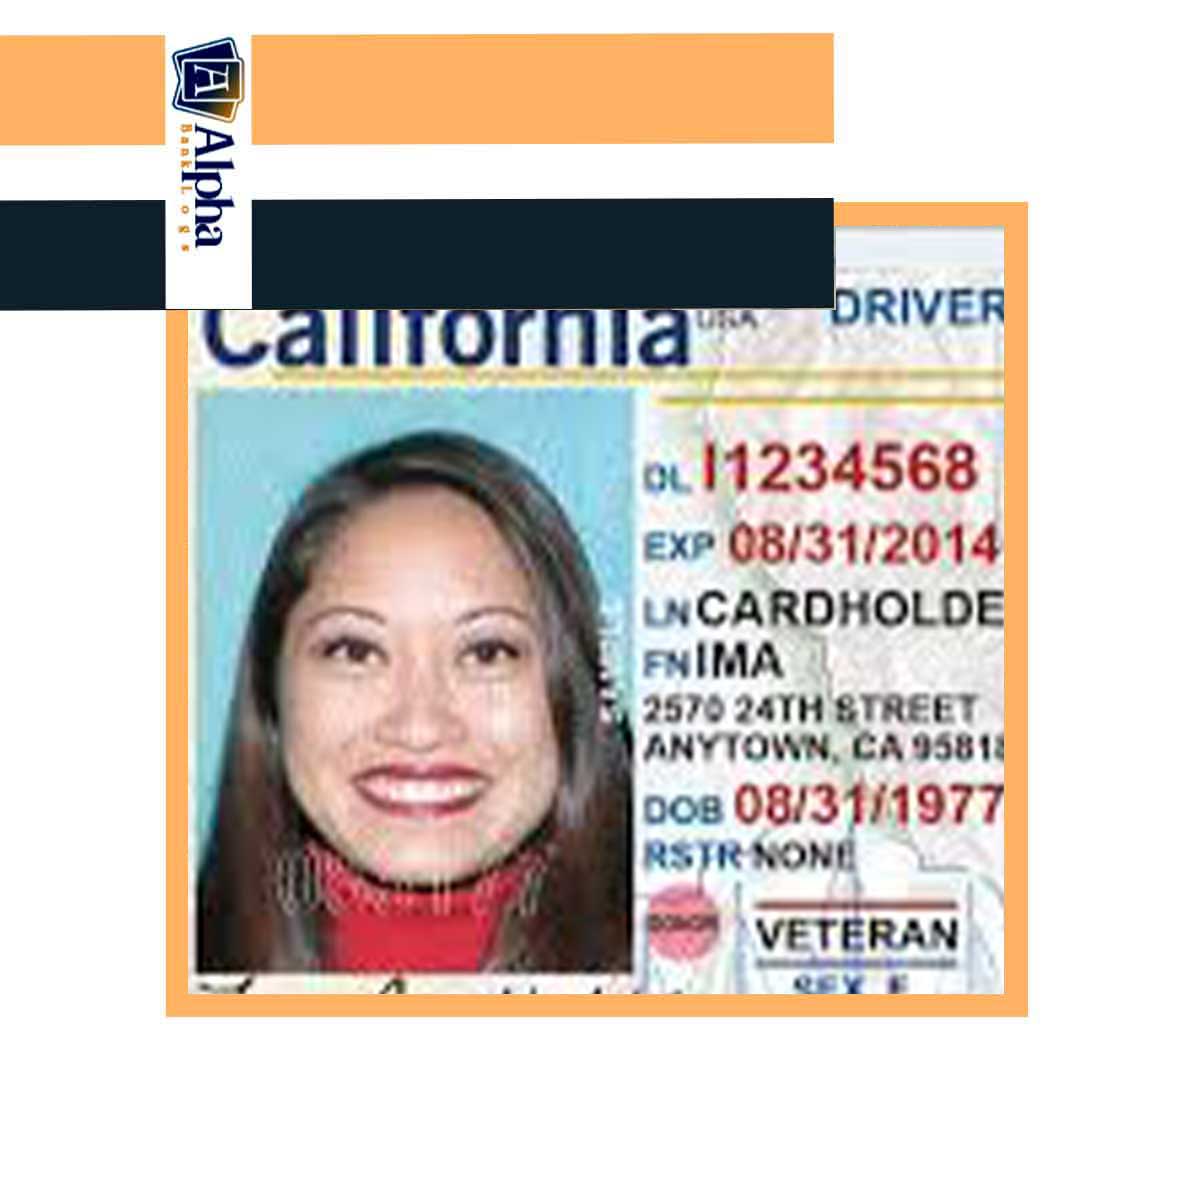 DRIVER LICENSE LOOKUP